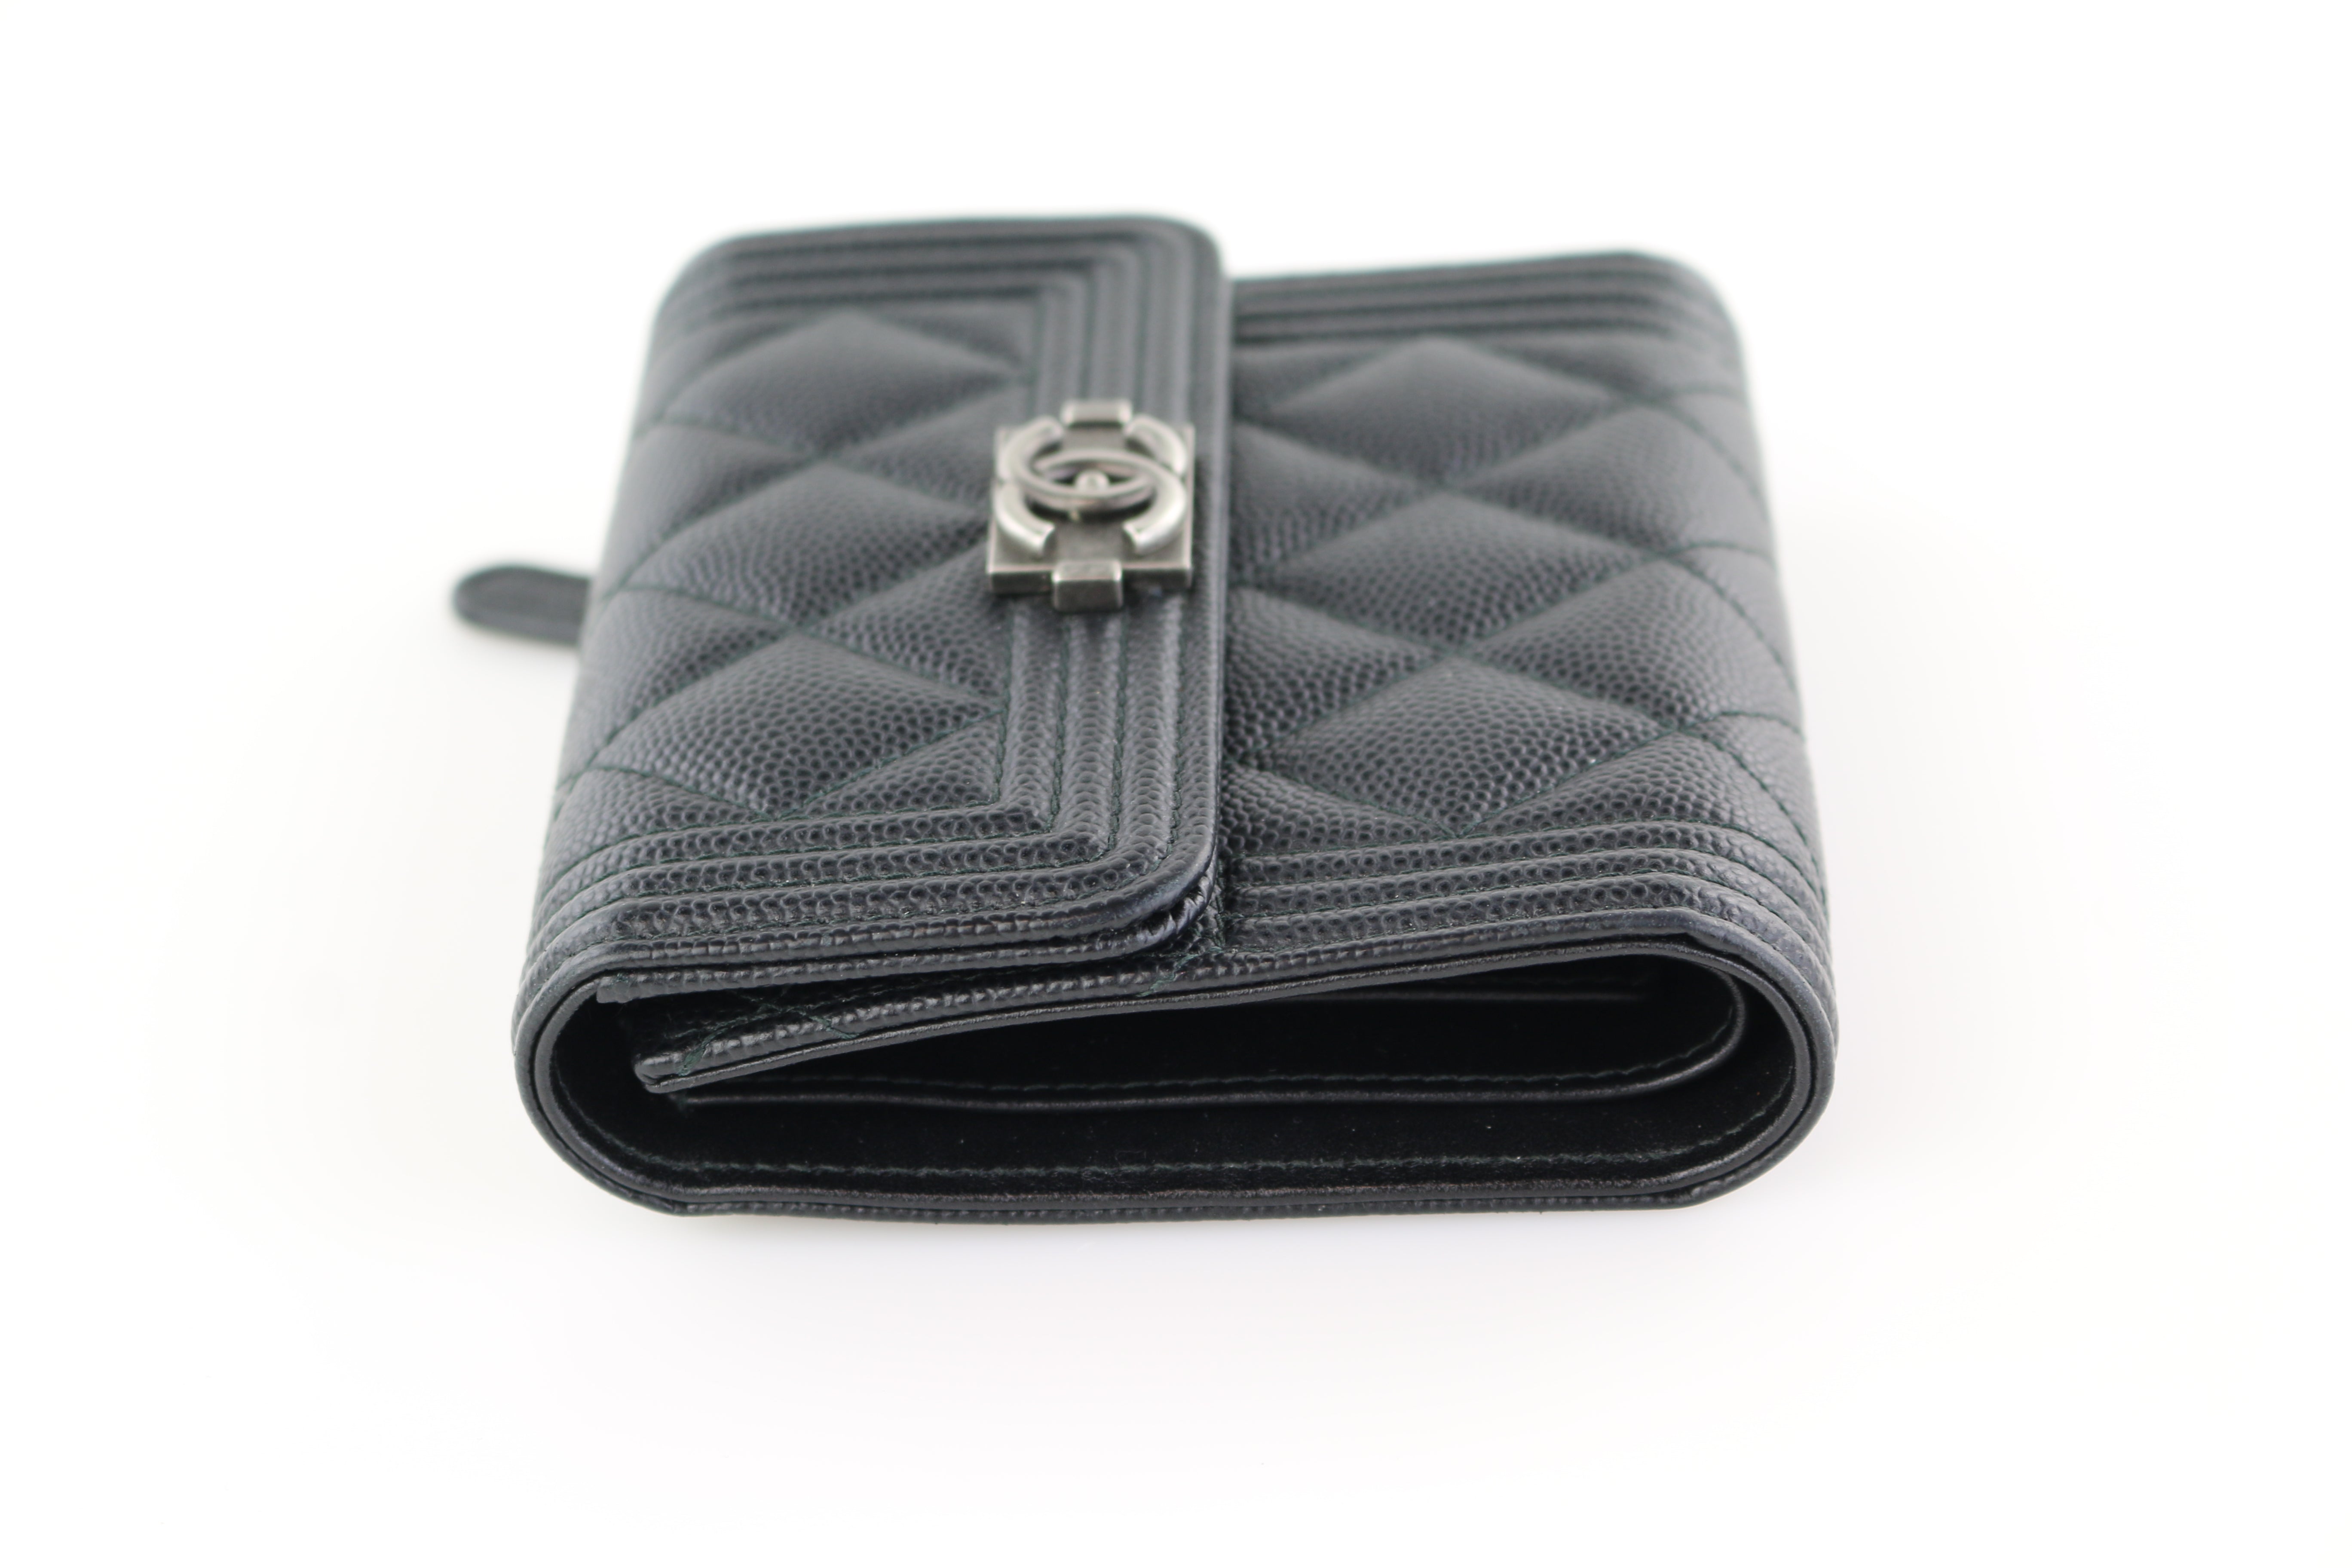 Chanel Black Caviar CC Wallet - Preowned - The Consignment Cafe